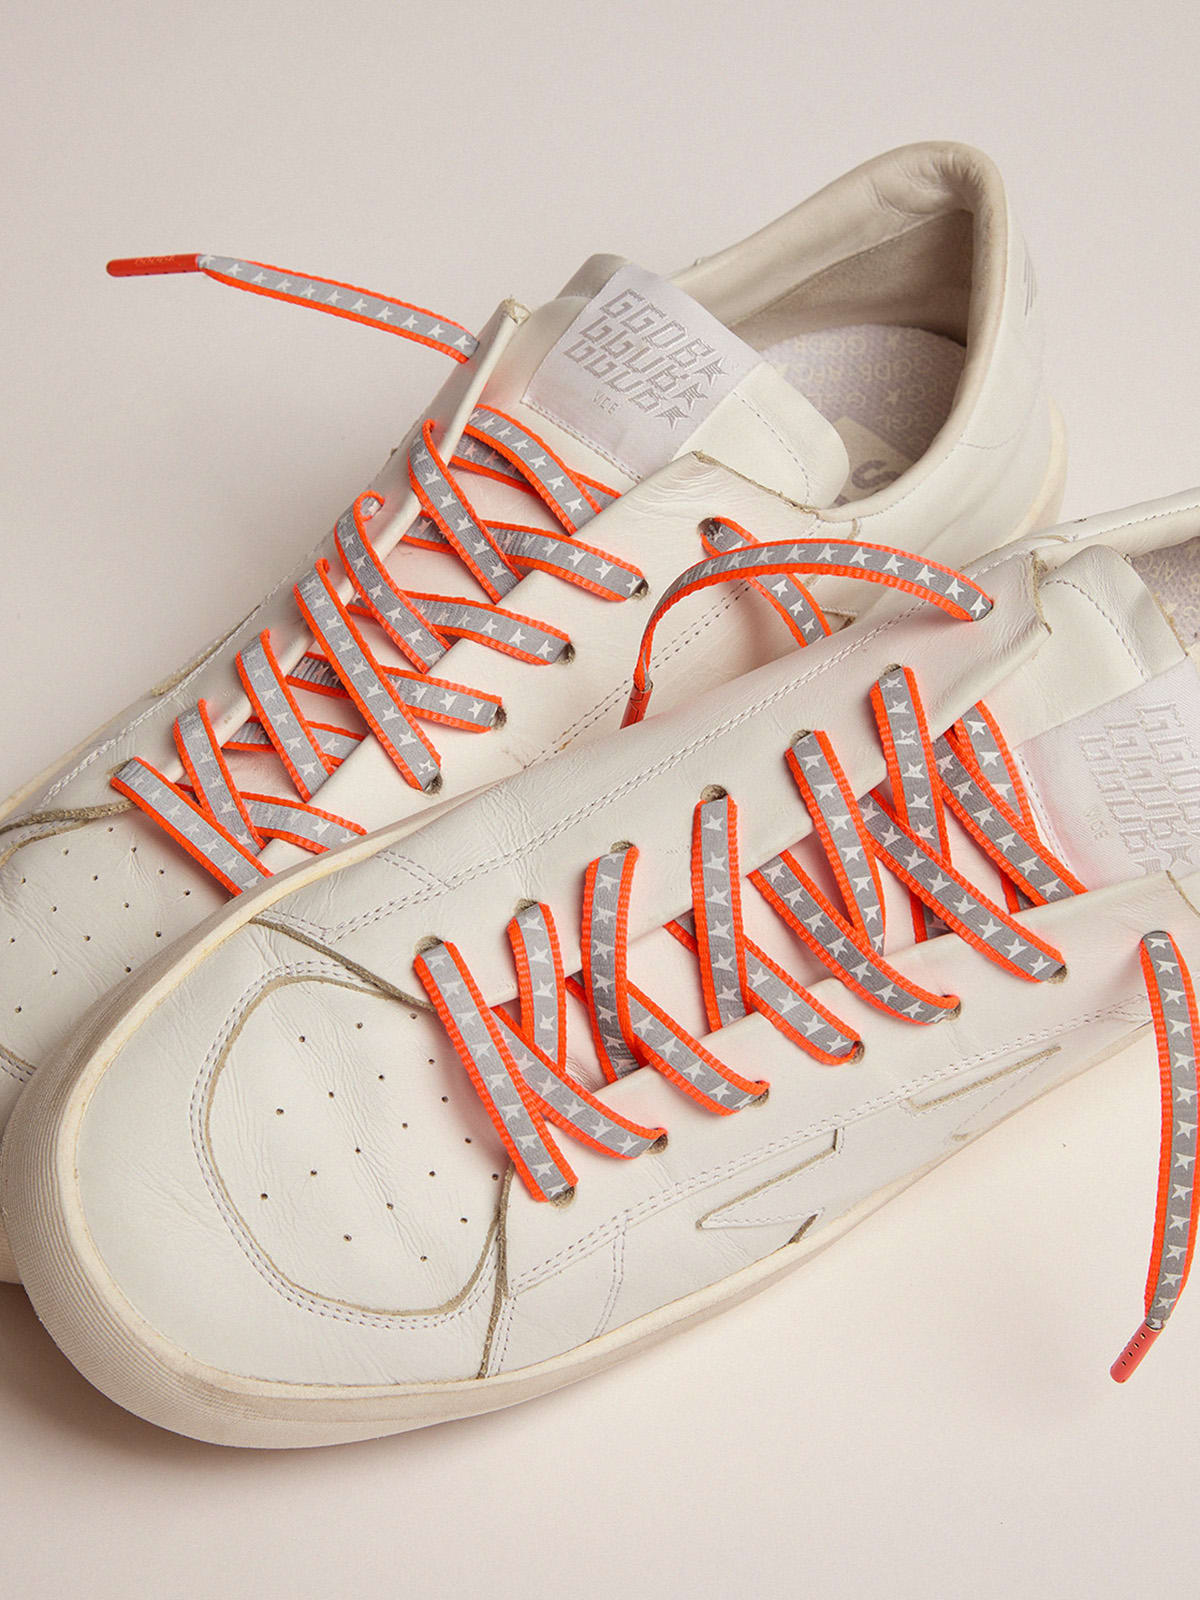 Golden Goose - Neon orange reflective laces with stars in 